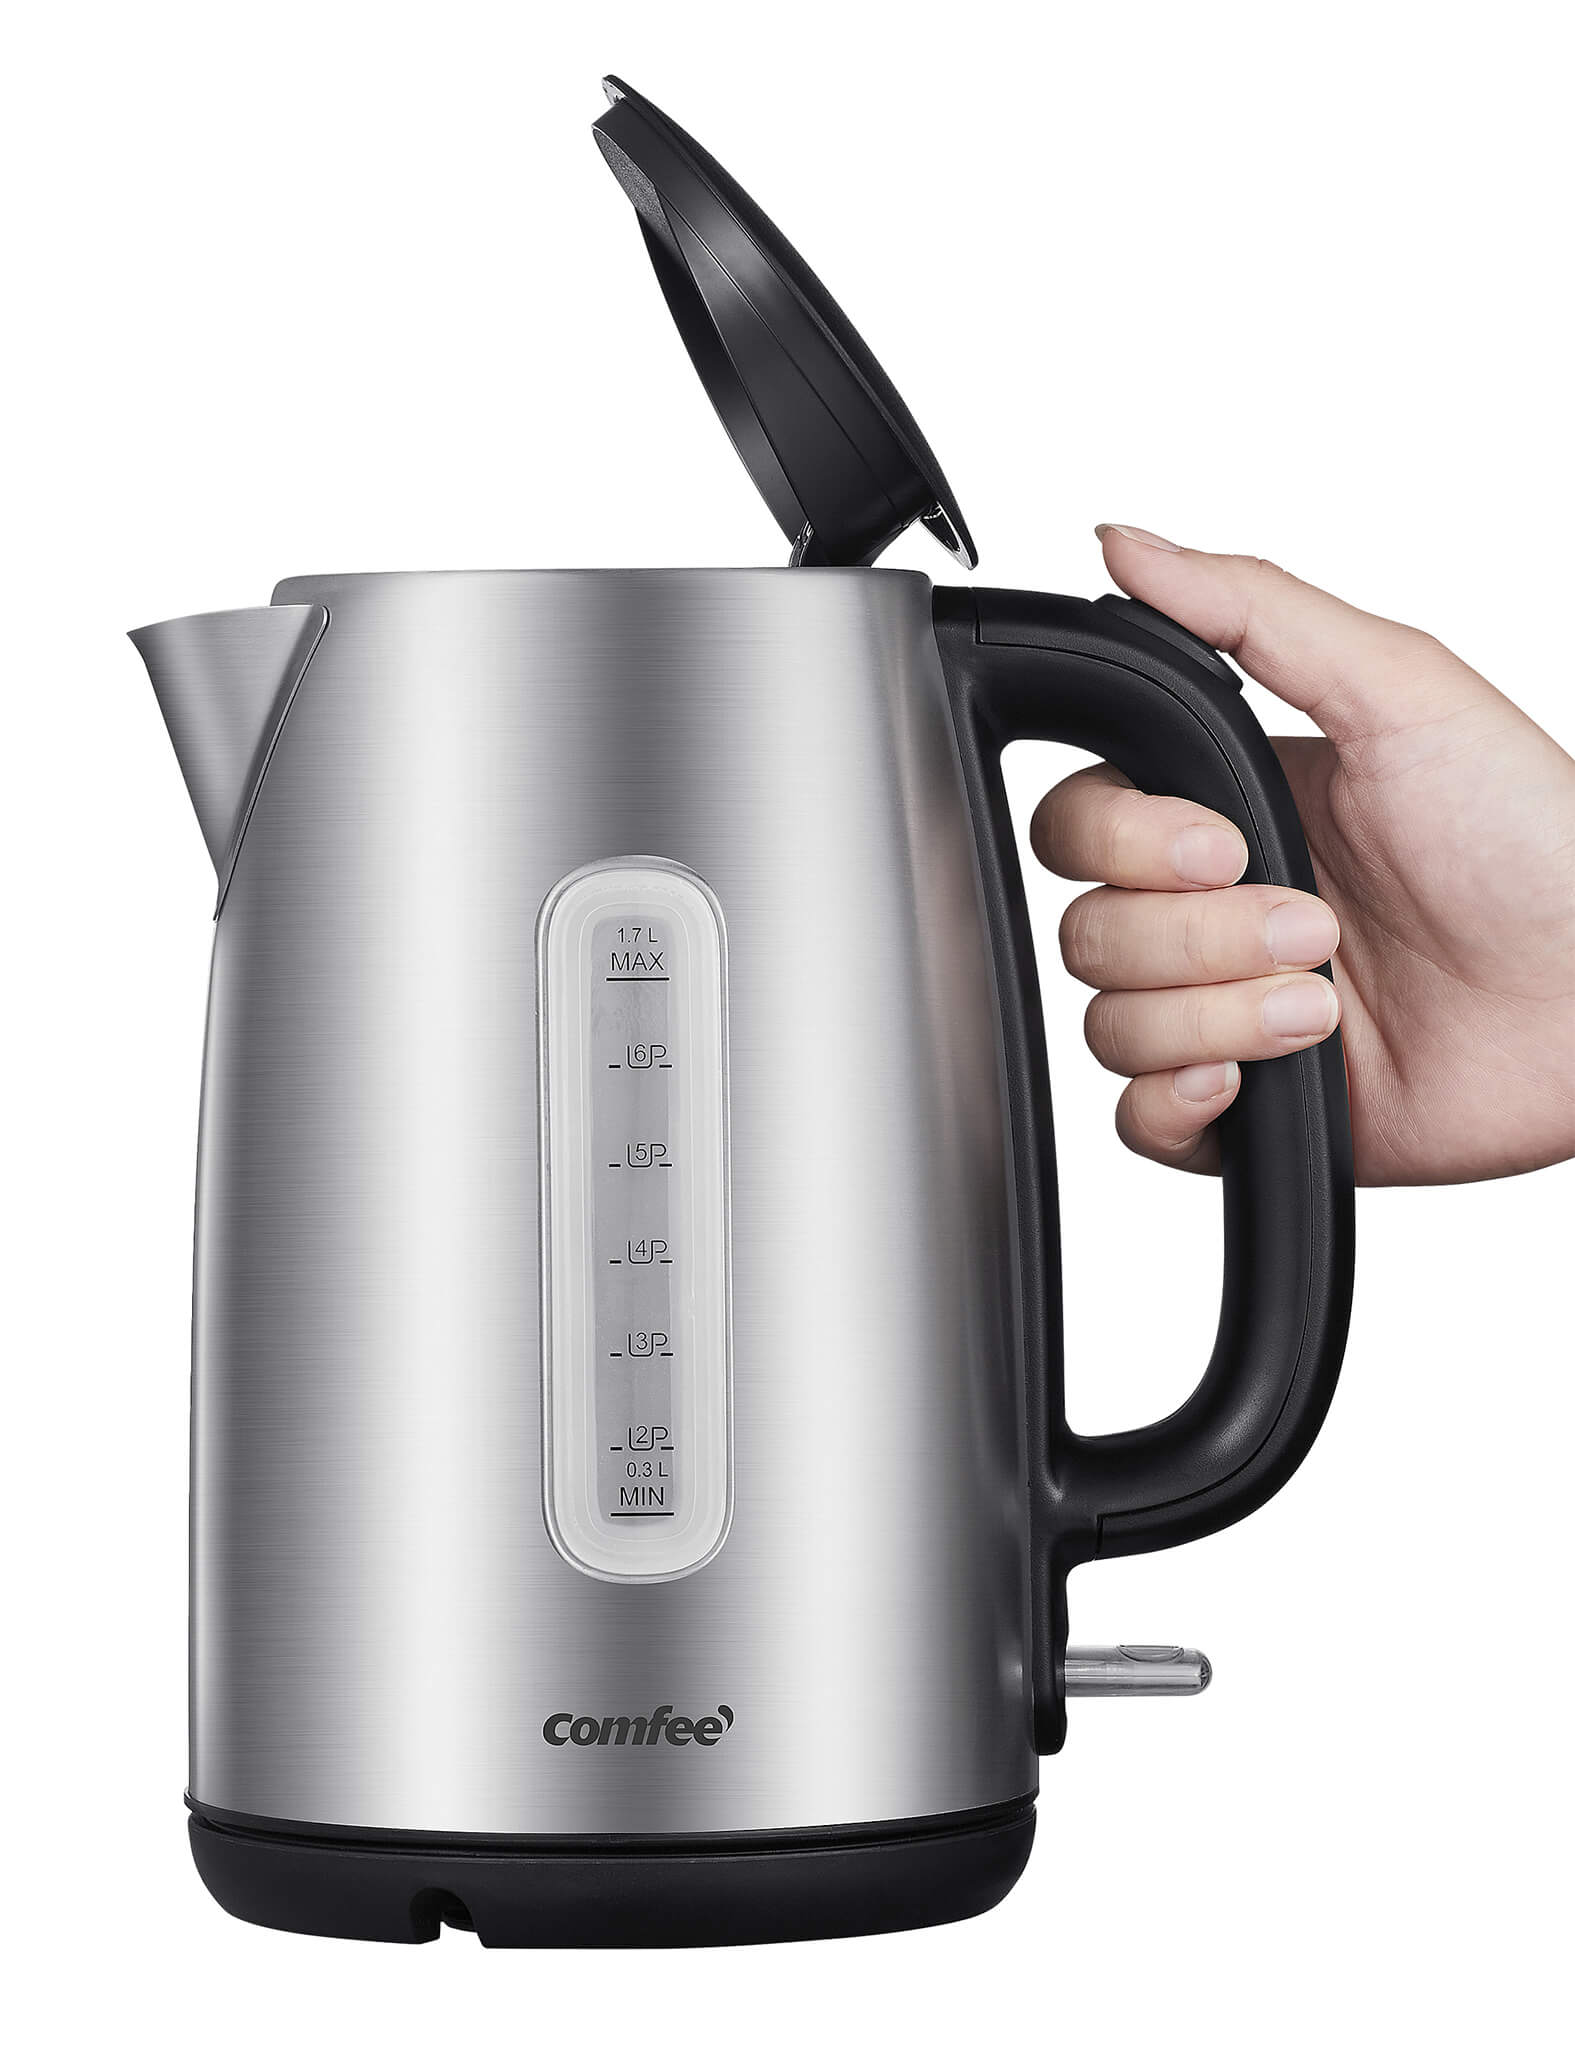 COMFEE' Stainless Steel Cordless Electric Kettle. 1500W Fast Boil with LED  Light, Auto Shut-Off and Boil-Dry Protection. 1.7 Liter